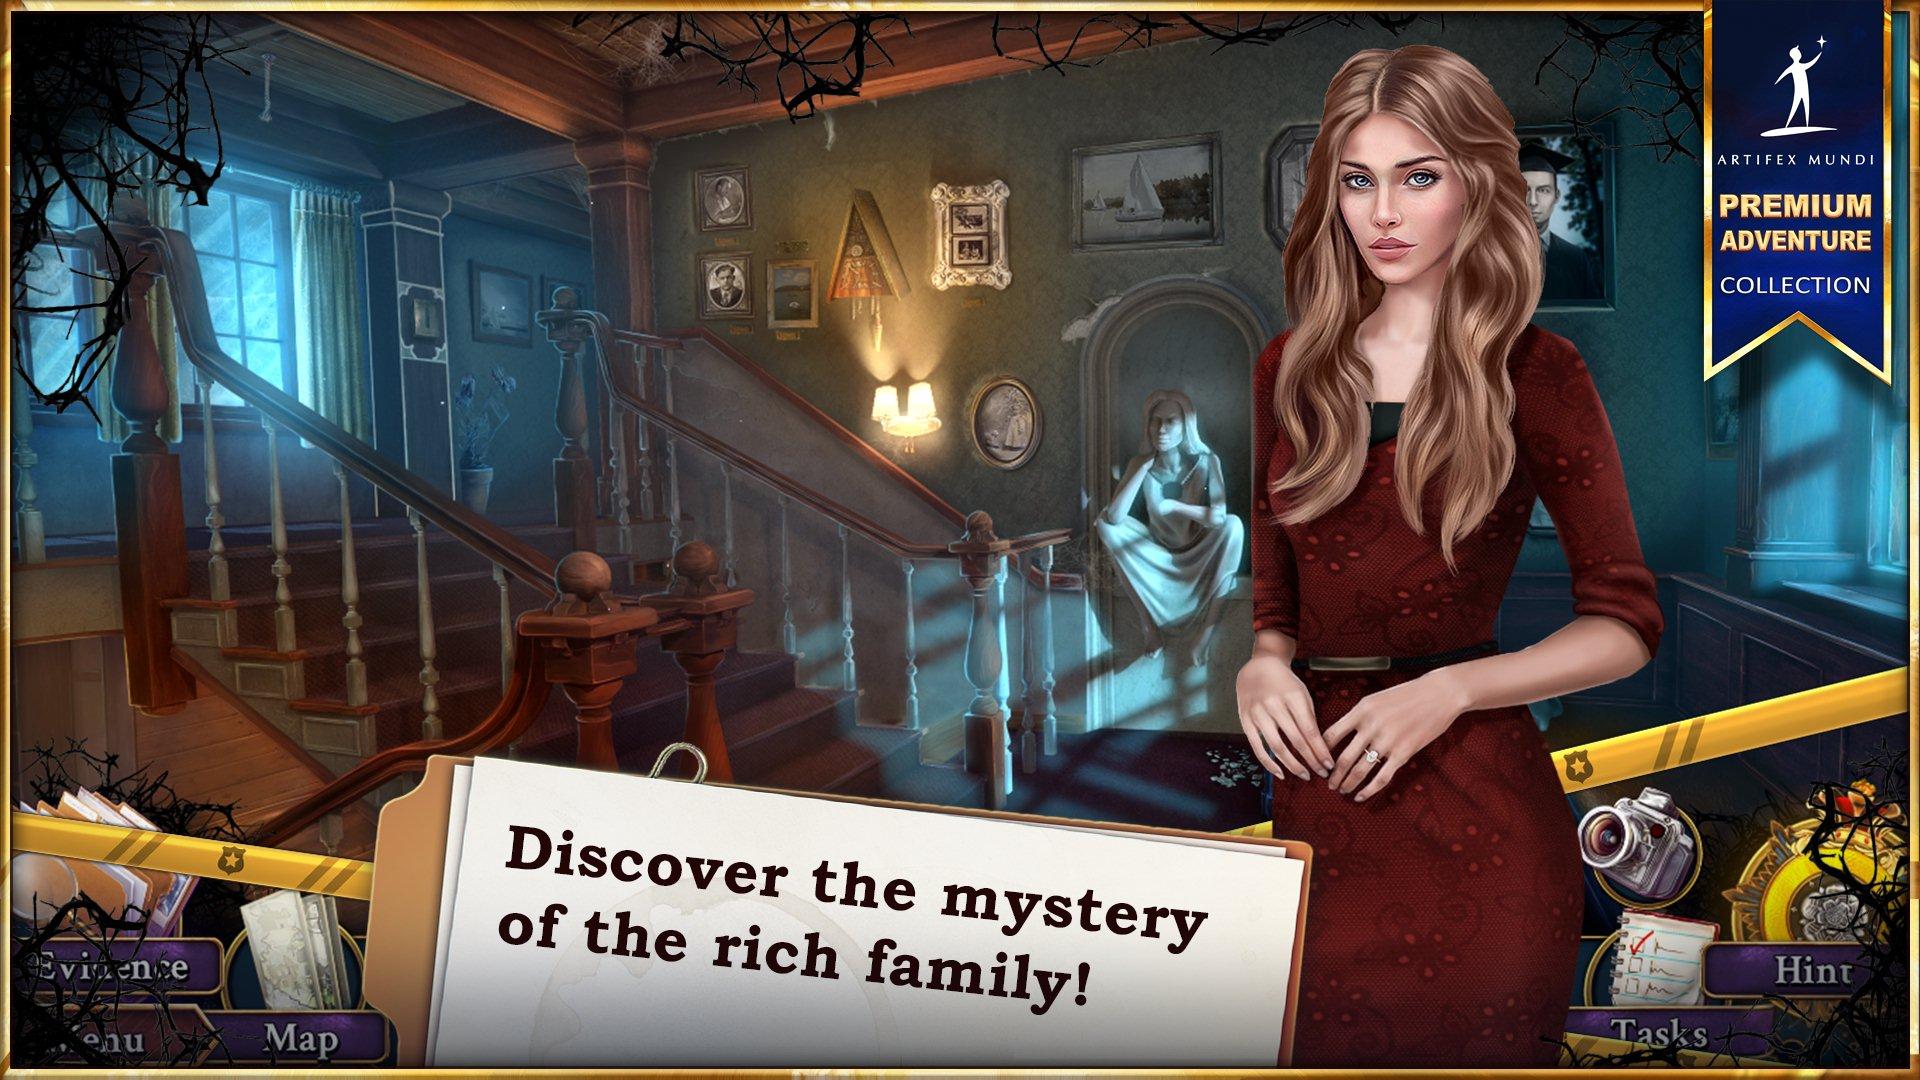 Path of Sin: Greed for mac instal free